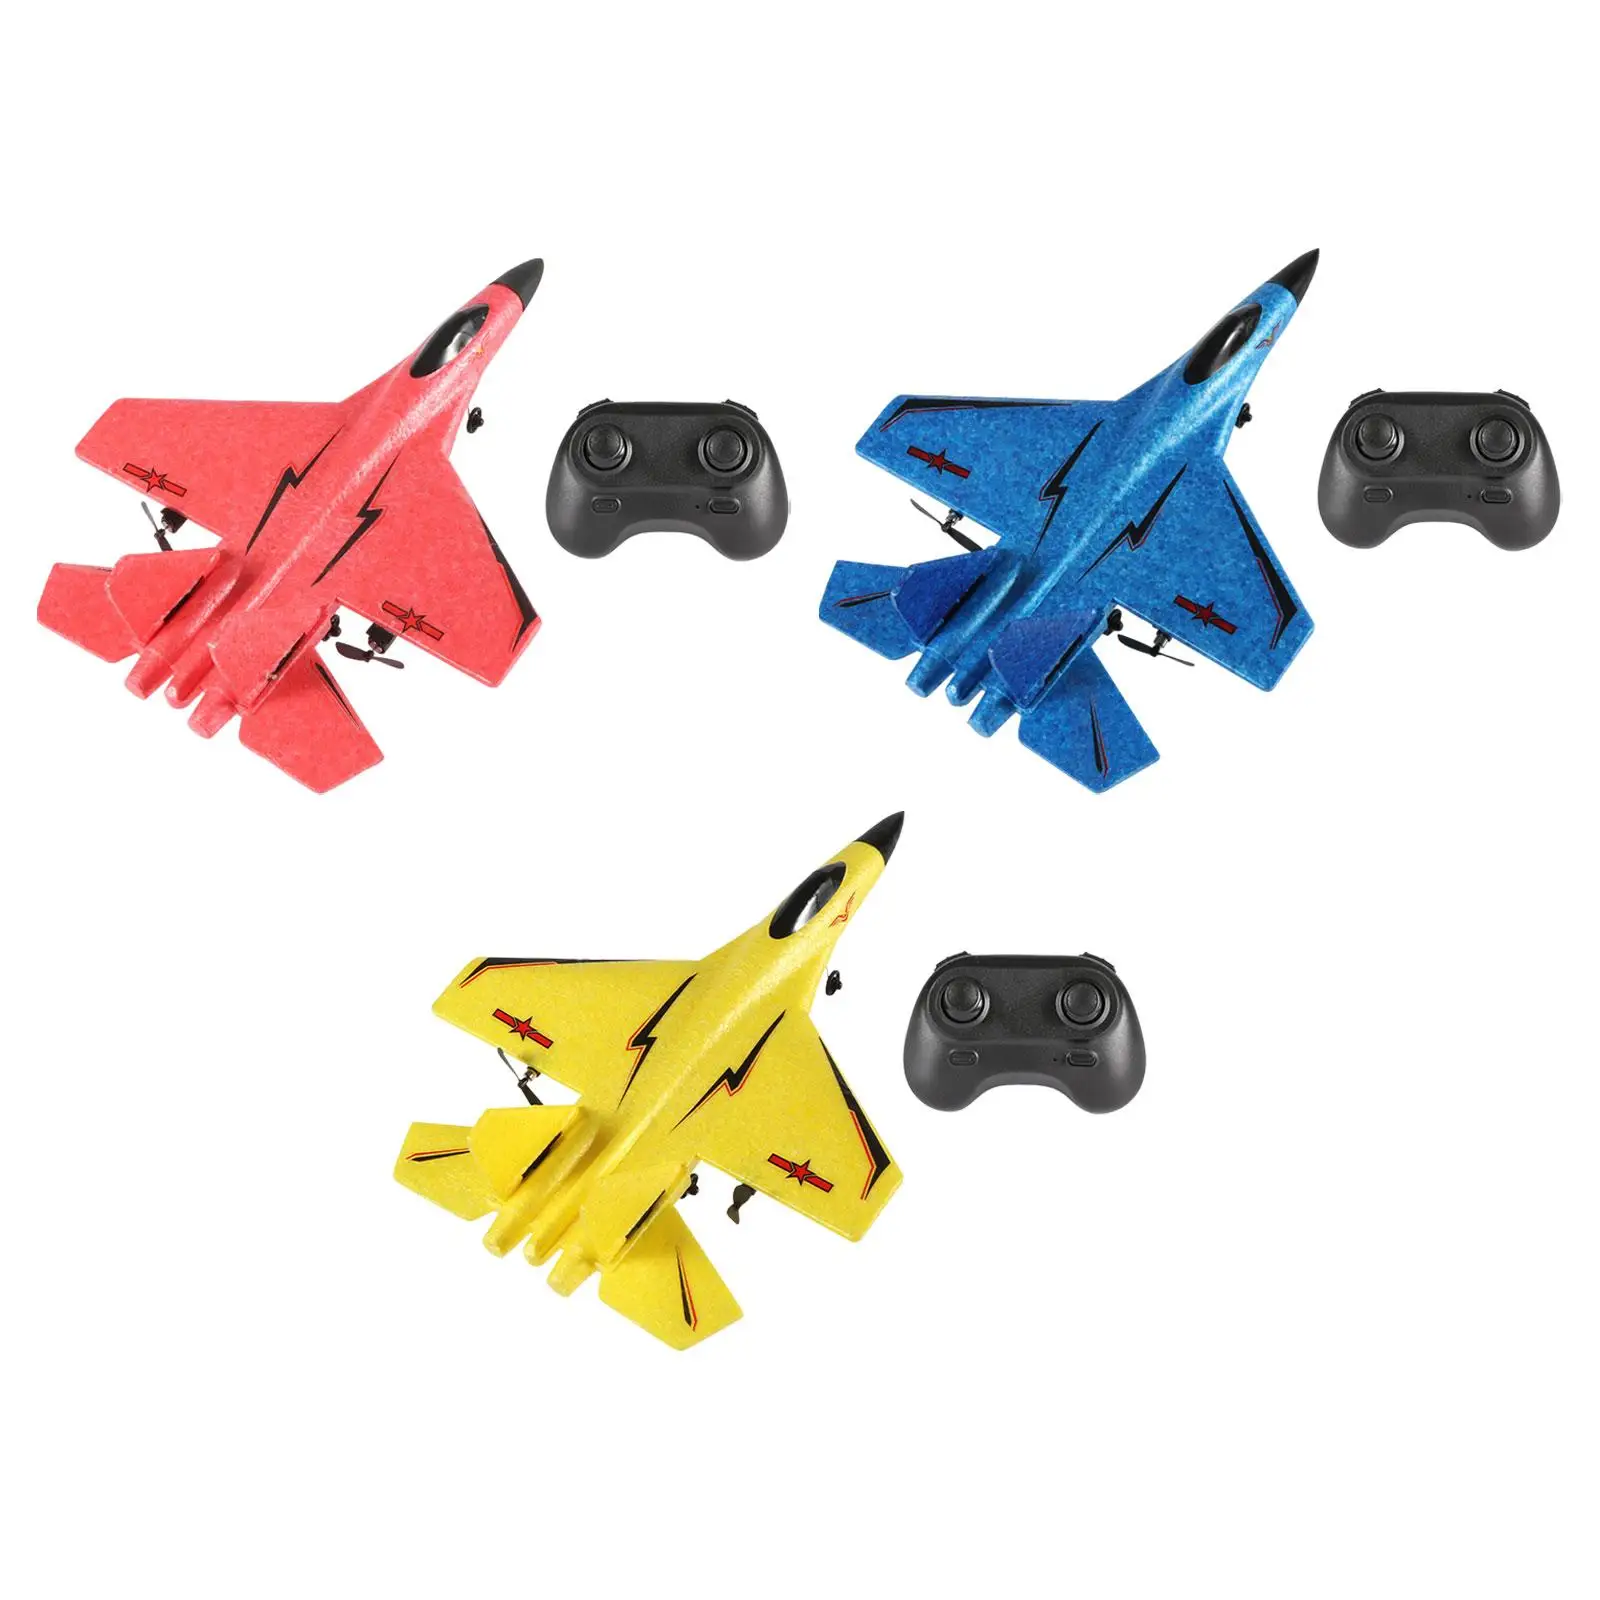 RC Jet Glider Foam Airplane Outdoor Toy 2 Channel Boys Gift Easy to Control Intelligent Gyroscope Anti Falling for Kids RC Plane